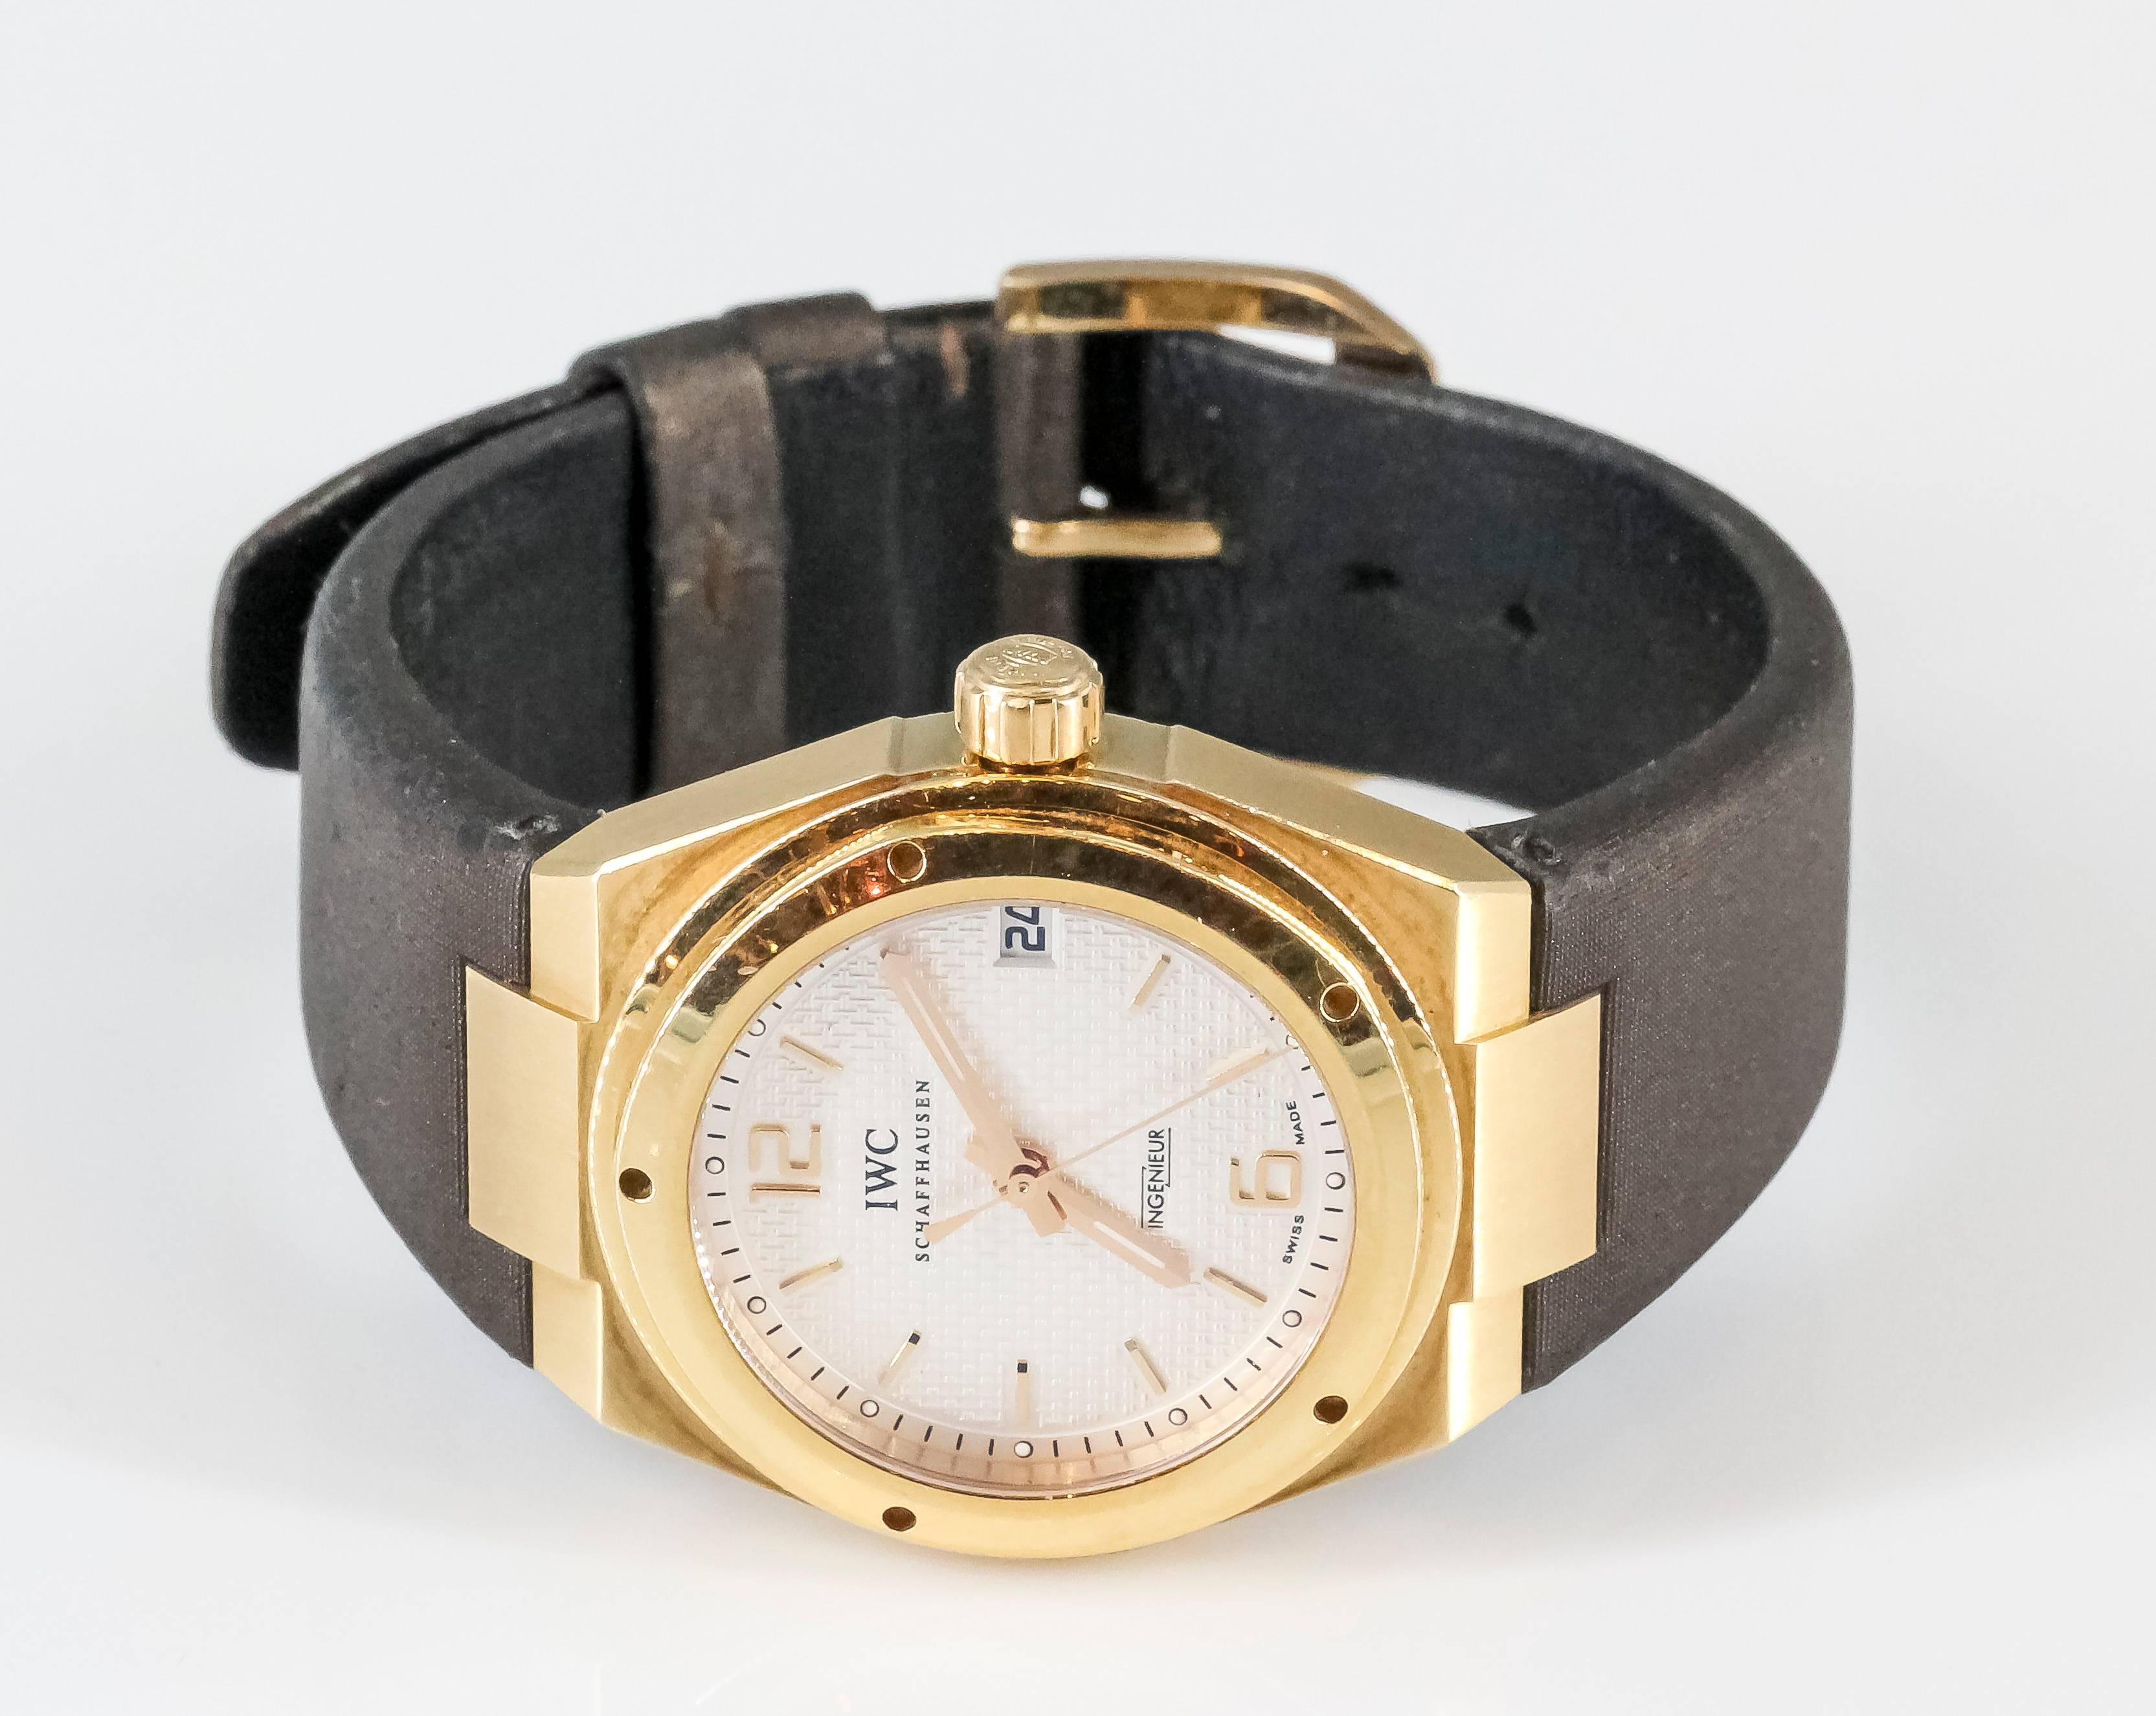 Handsome 18K yellow gold wrist watch from the "Ingenieur" collection by IWC. It features a bold and simple design, with hidden lugs, date at 3 o'clock and numbers at 12 and 6. Unisex design can be worn by men or women. Features 18K gold